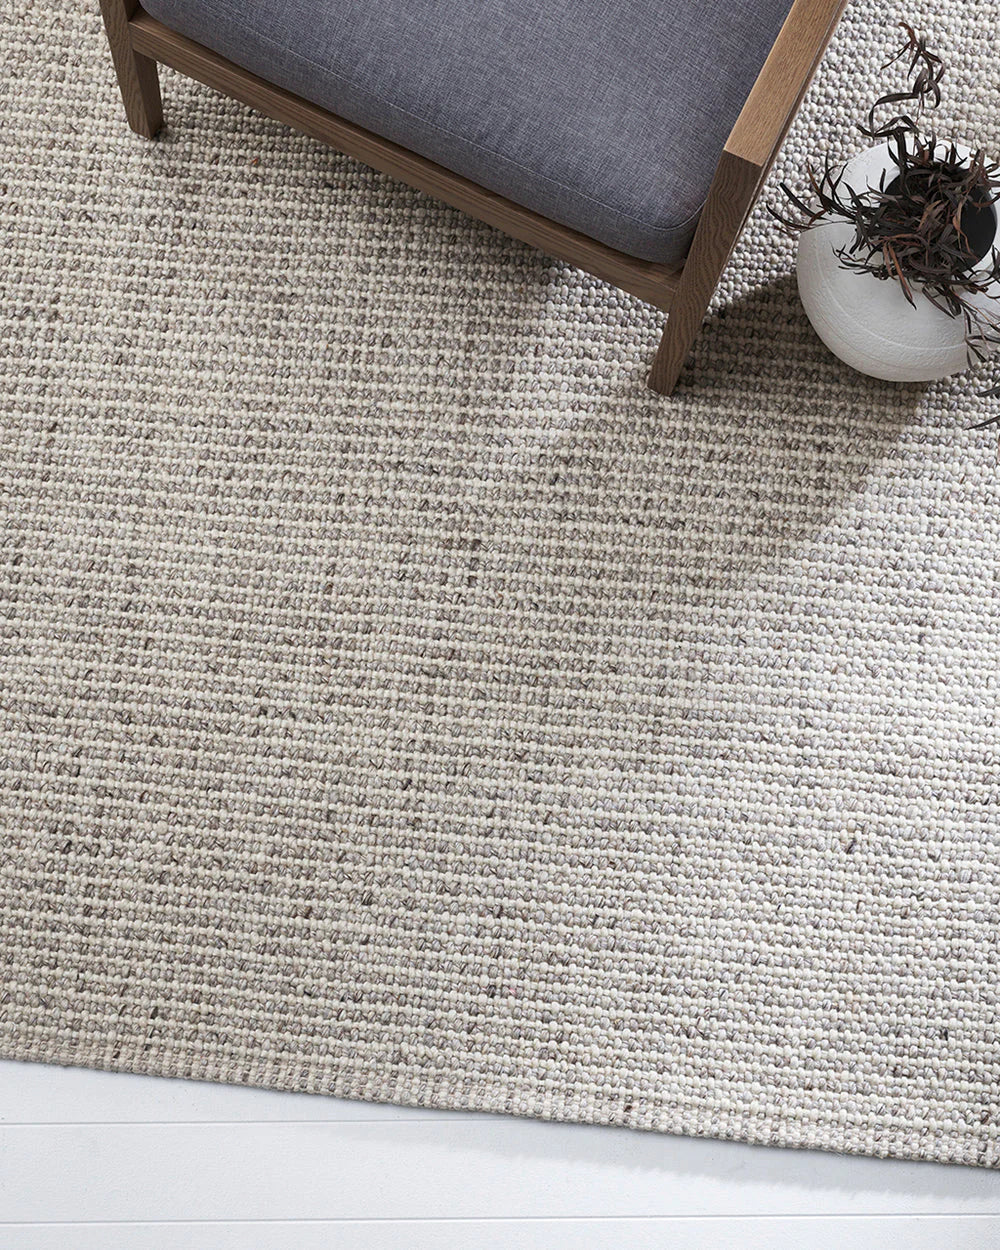 Kansas Oyster Natural Rug from Baya Furtex Stockist Make Your House A Home, Furniture Store Bendigo. Free Australia Wide Delivery. Mulberi Rugs.